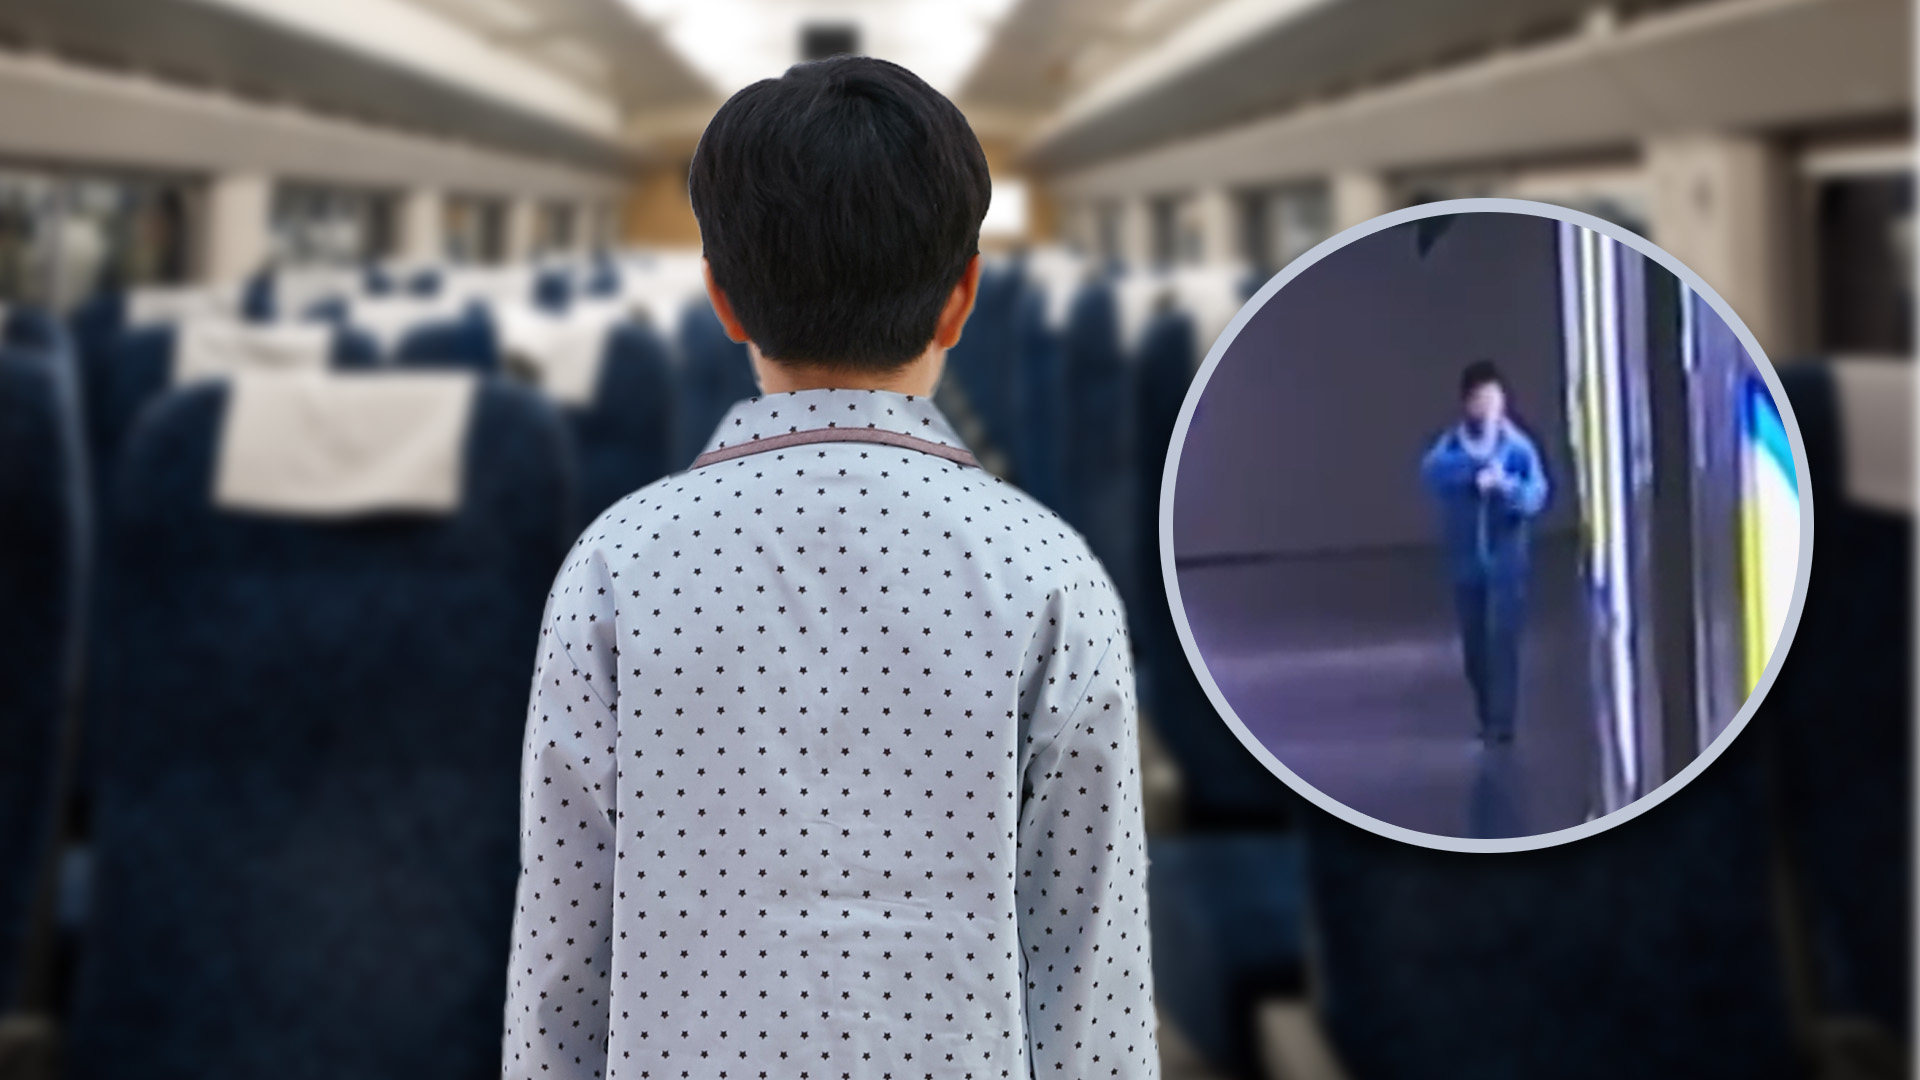 A distressed young boy in China ran away from home in his pyjamas and boarded a train to another city to try to find his mother after an argument with his strict father about his performance at school. Photo: SCMP composite/Shutterstock/Weibo